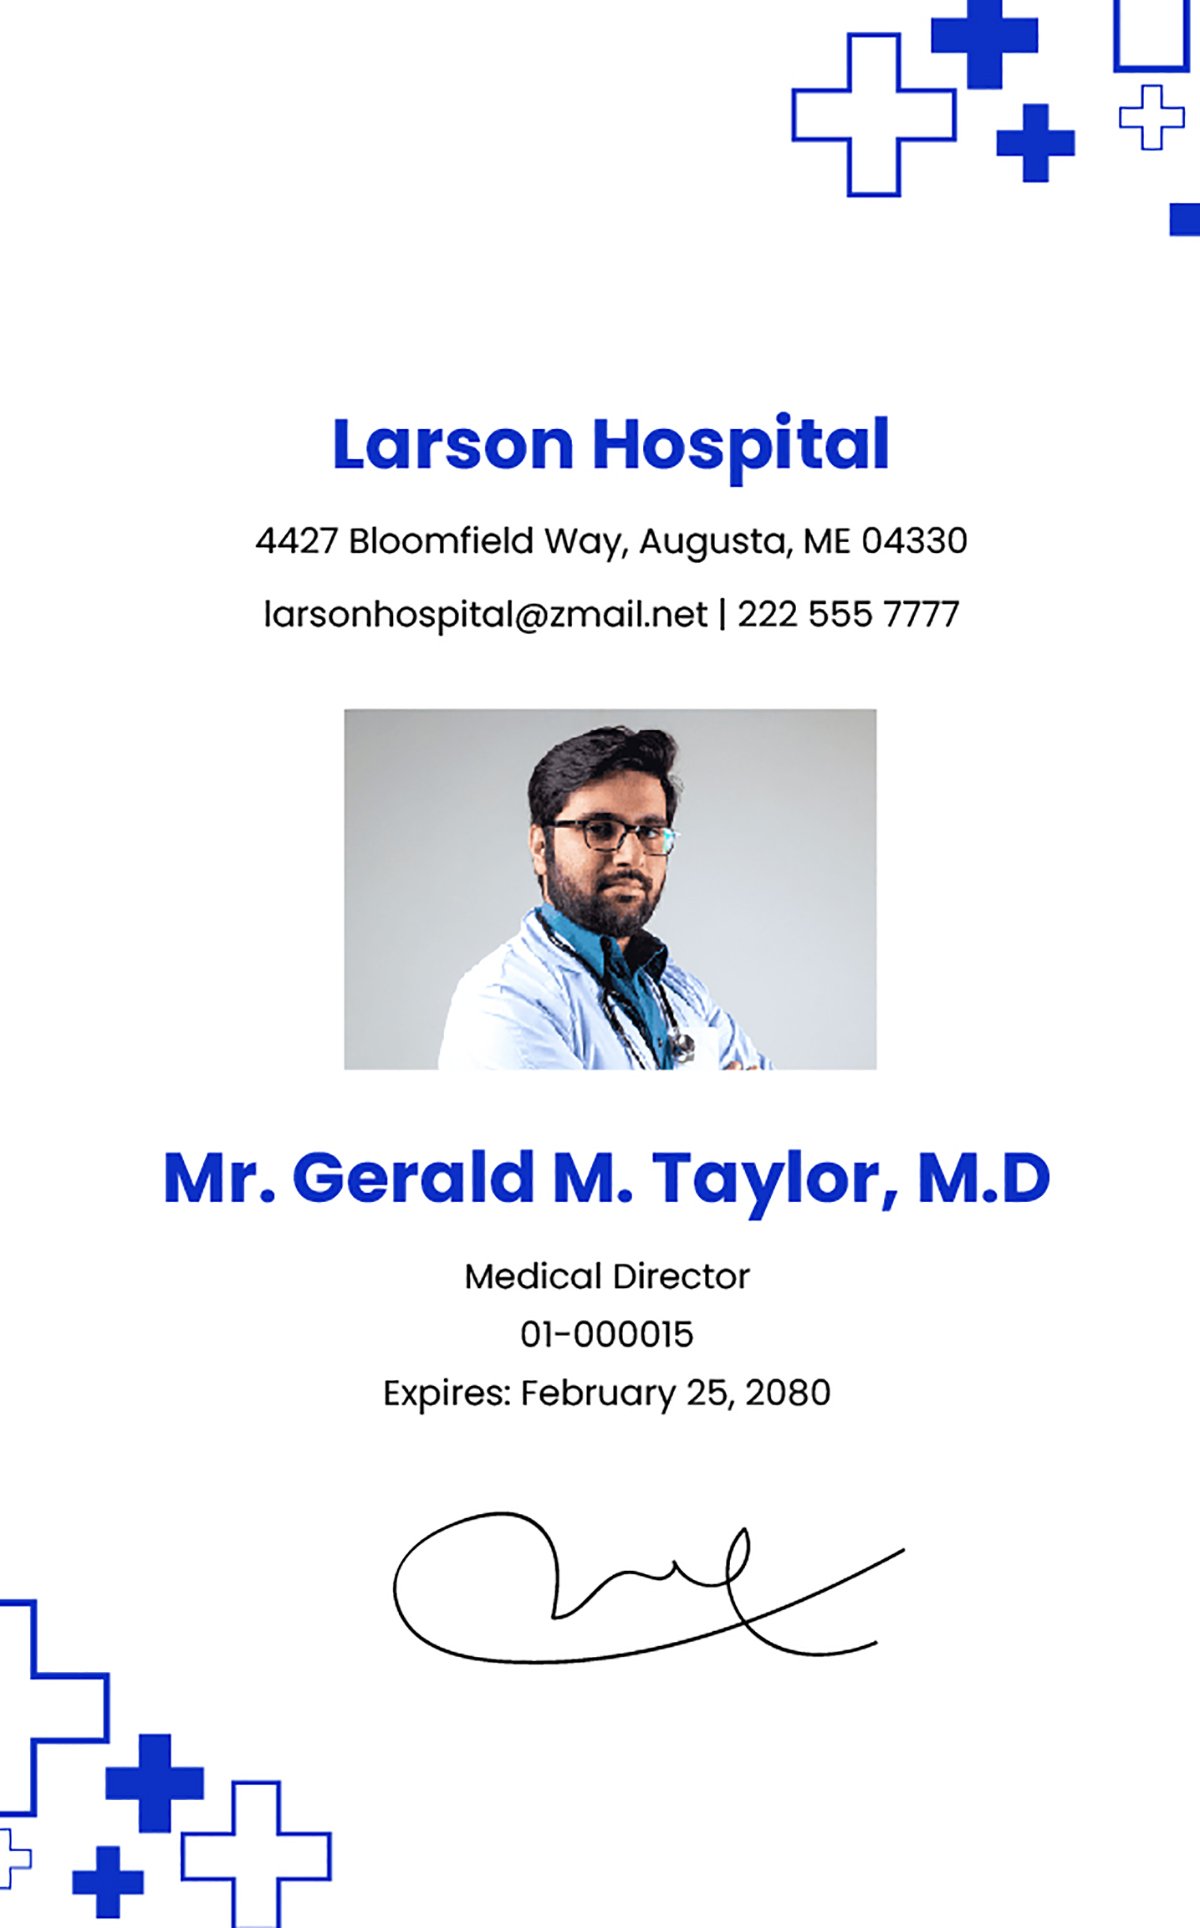 medical-doctor-id-card-template-download-in-word-illustrator-psd-template